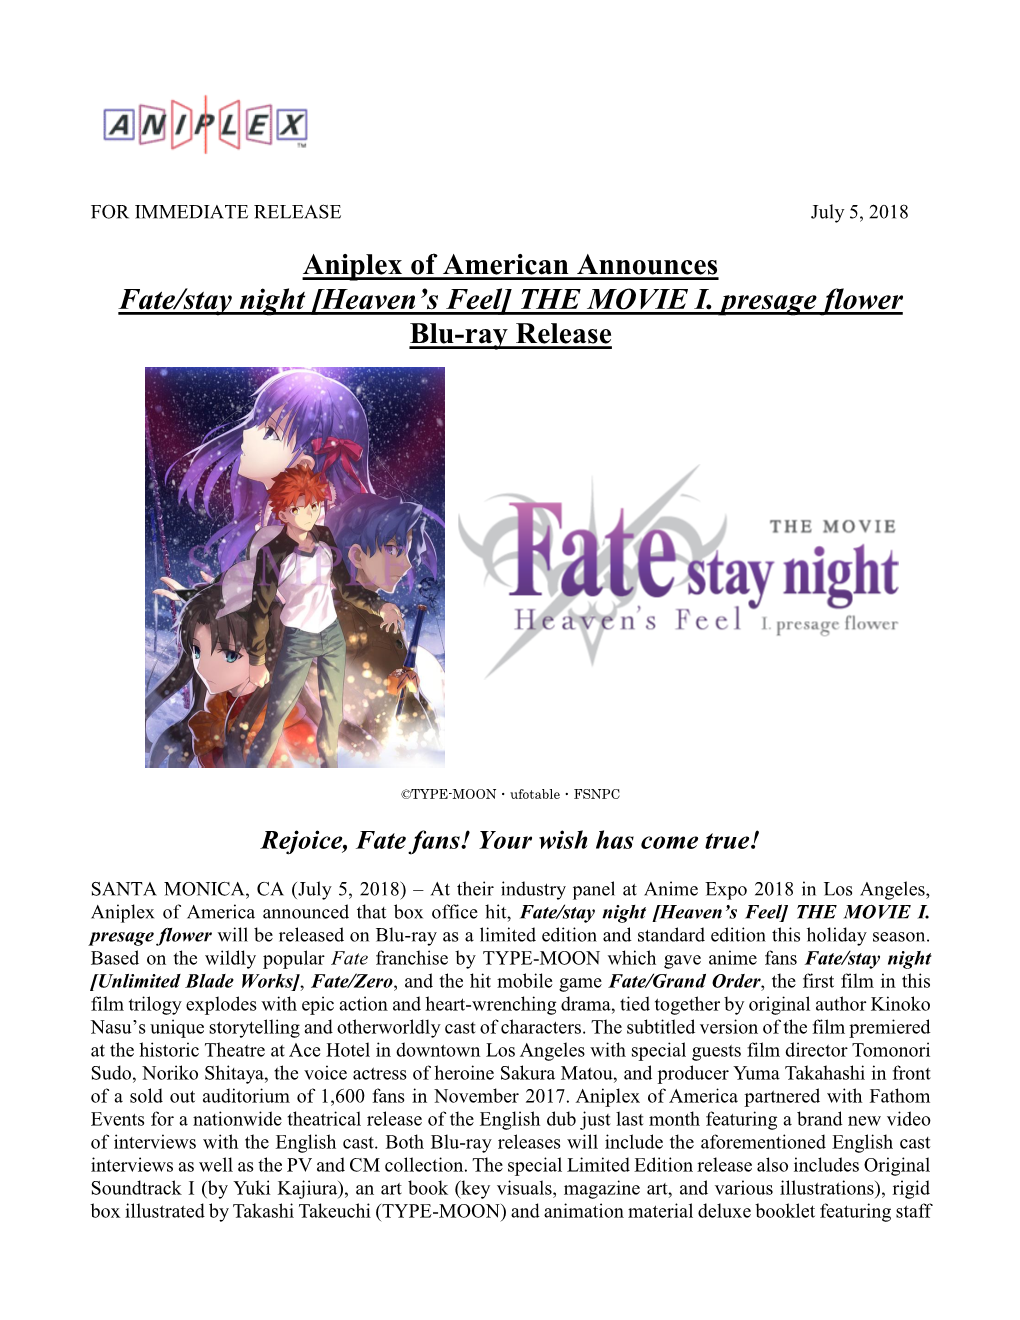 Aniplex of American Announces Fate/Stay Night [Heaven's Feel] THE